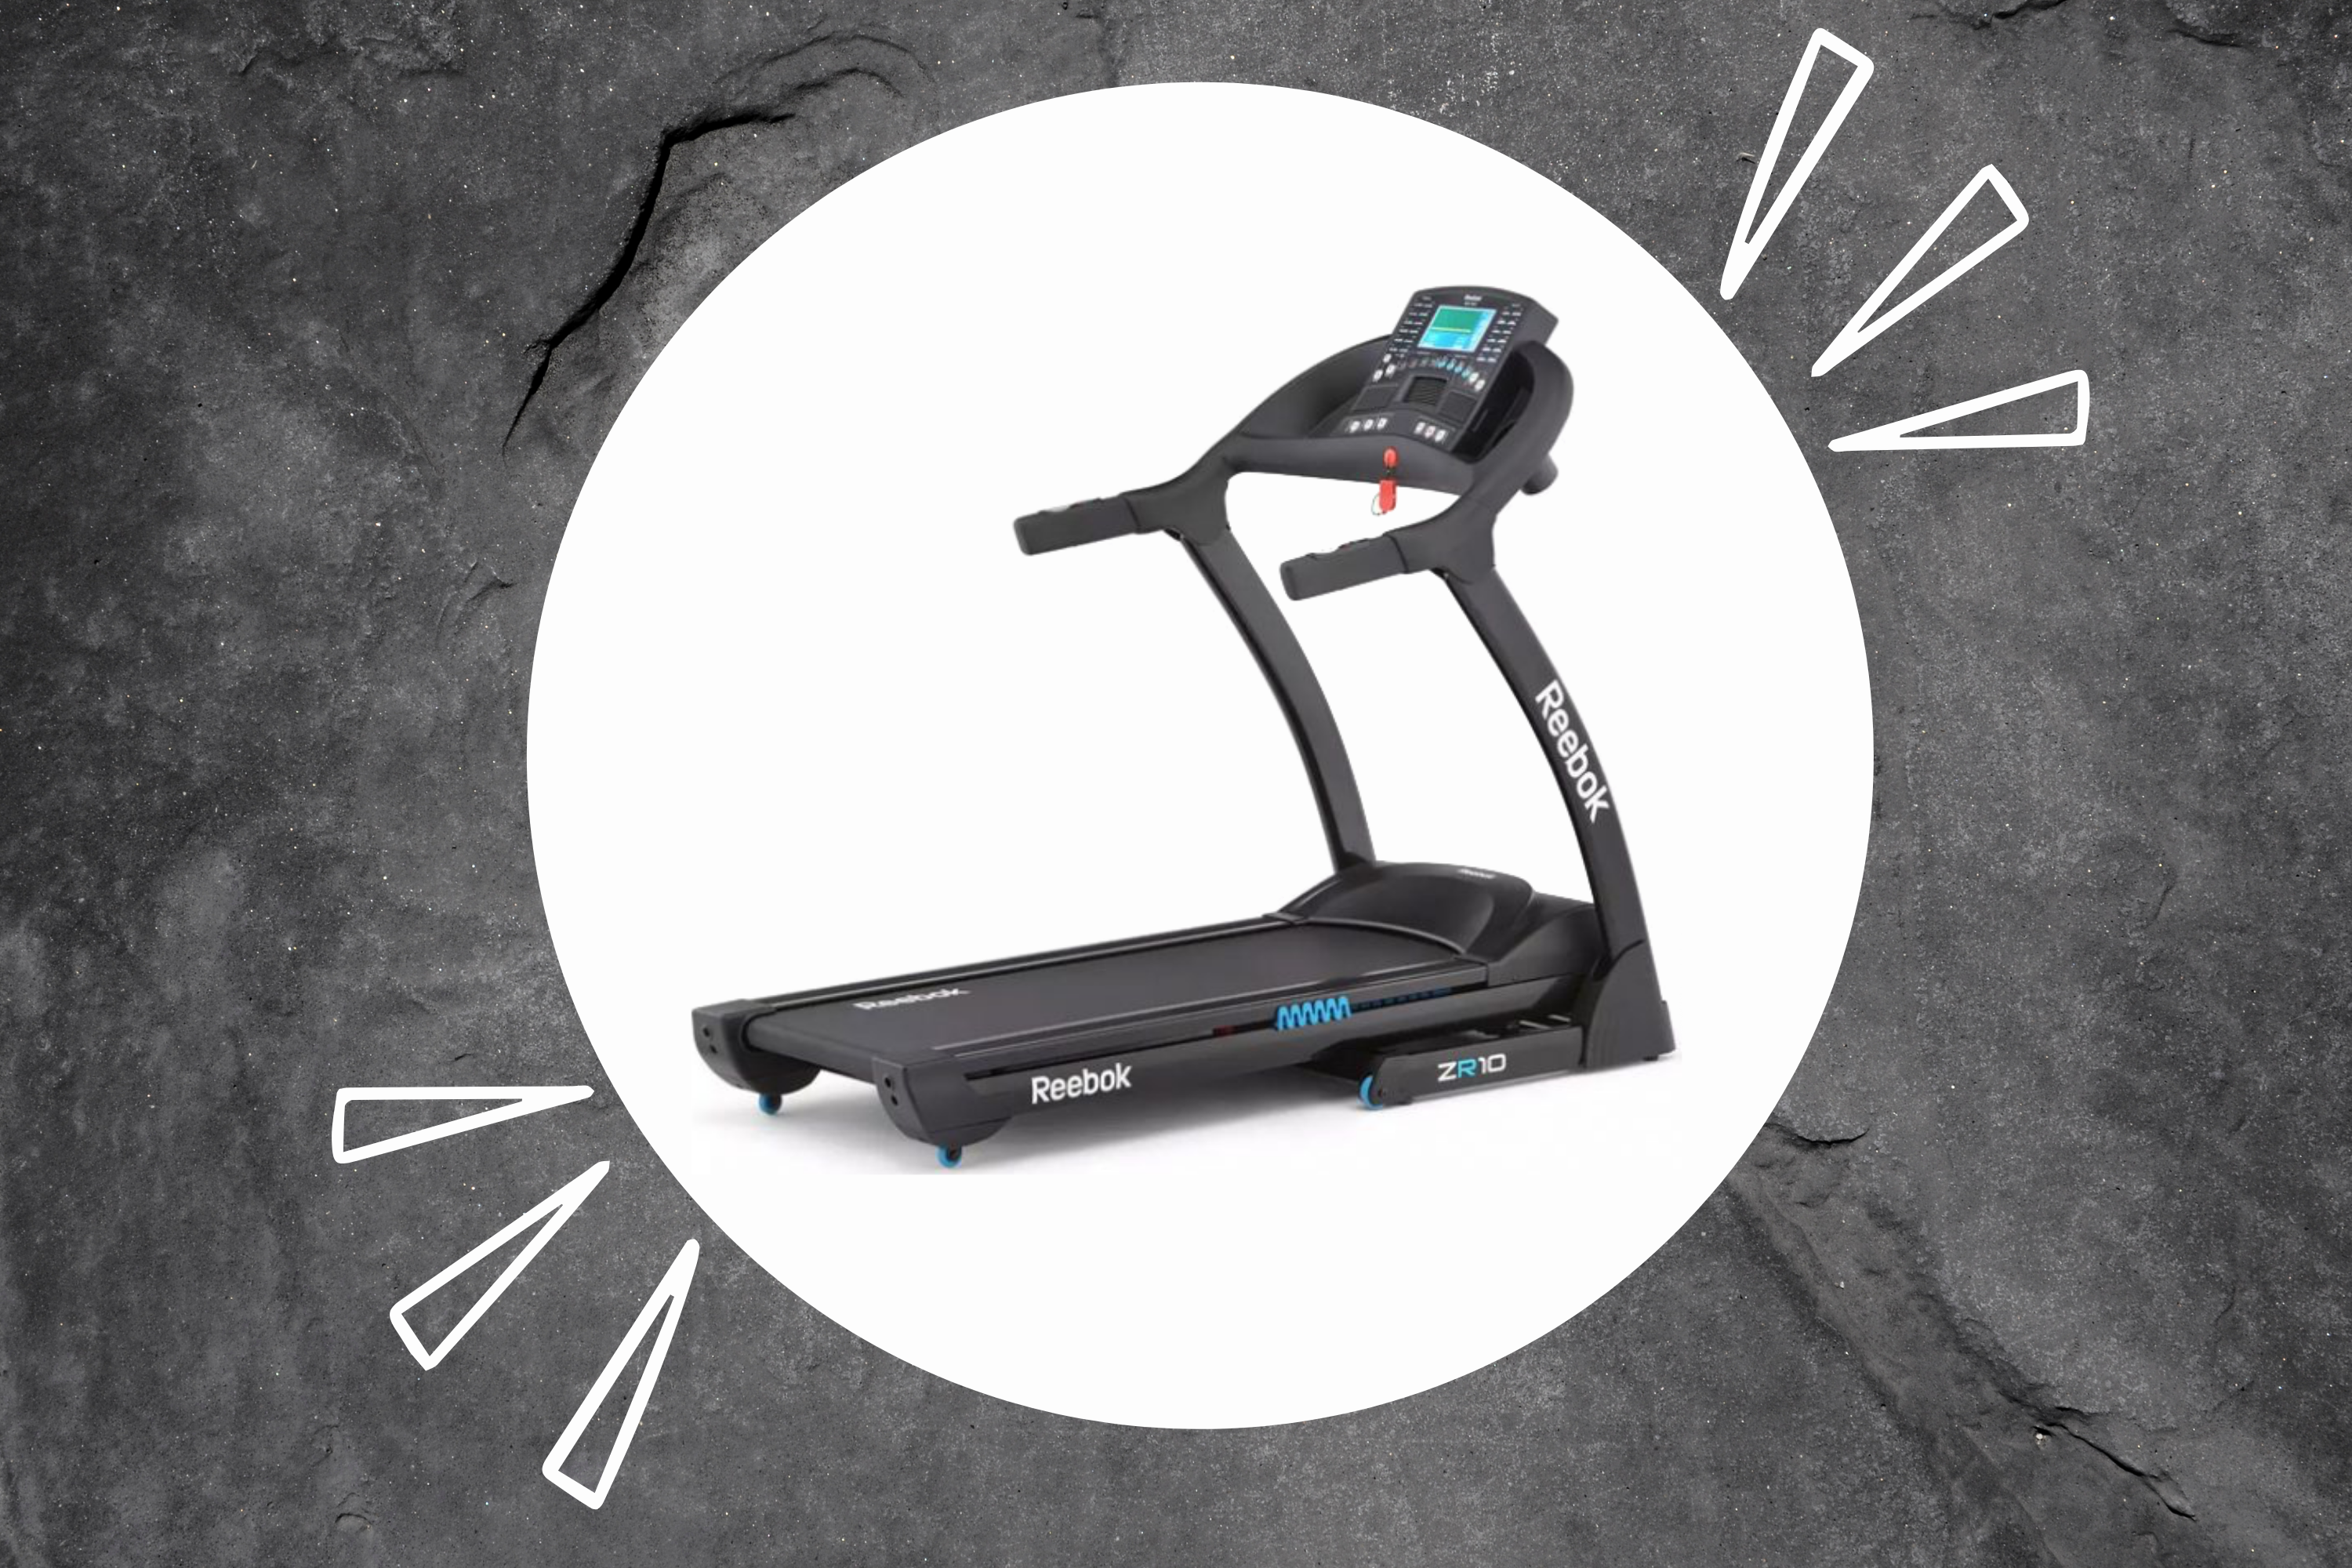 £550 on this Reebok treadmill with Sports Direct's fitness deals %% | GoodTo